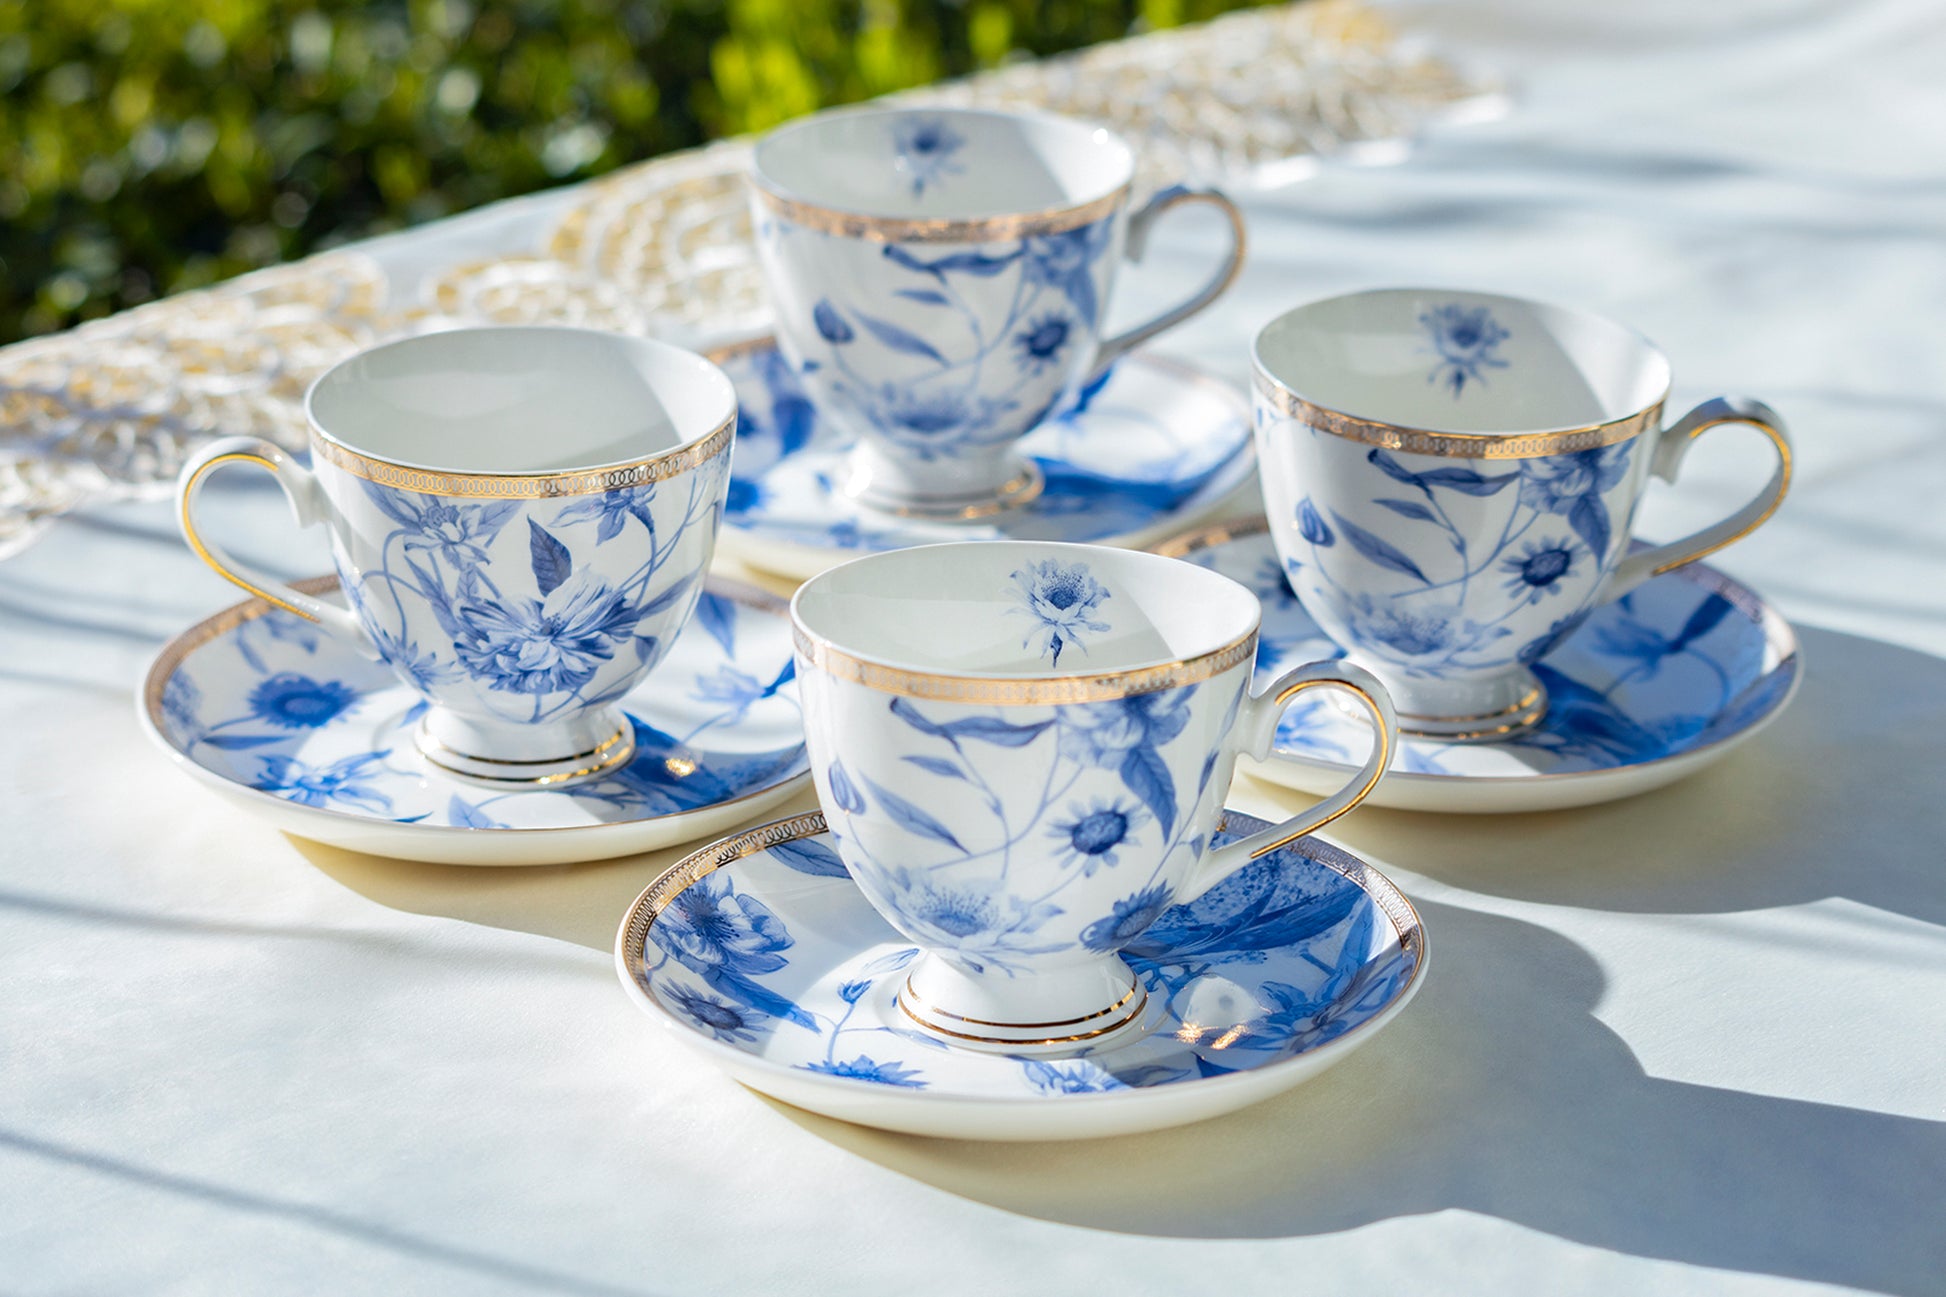 Blue Flowers with Hummingbird Fine Porcelain Tea Cup and Saucer Set of 4 Grace Teaware